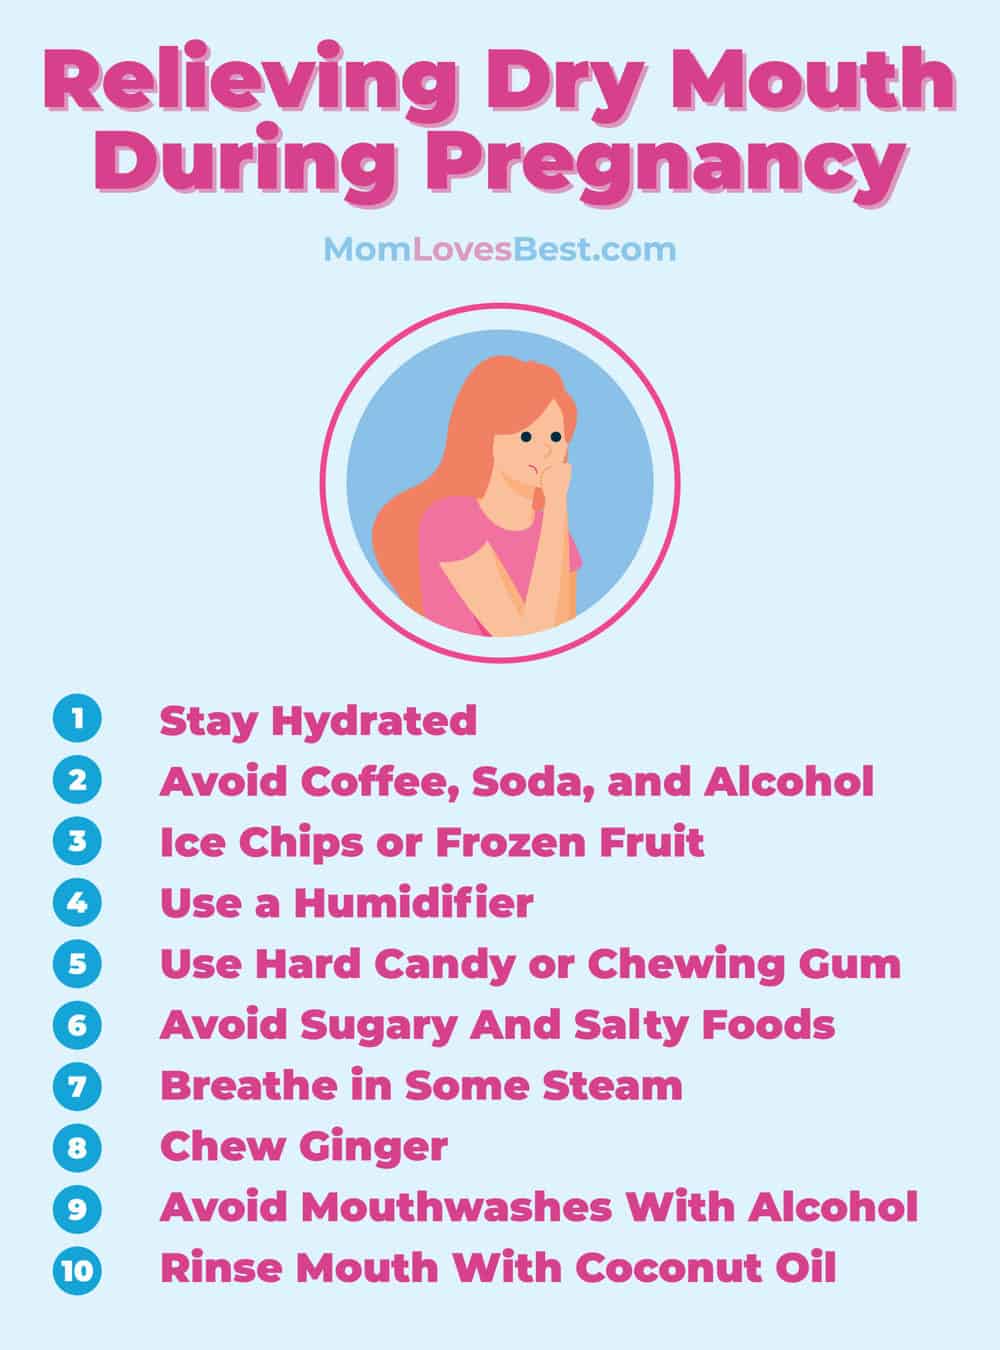 how to relieve dry mouth during pregnancy